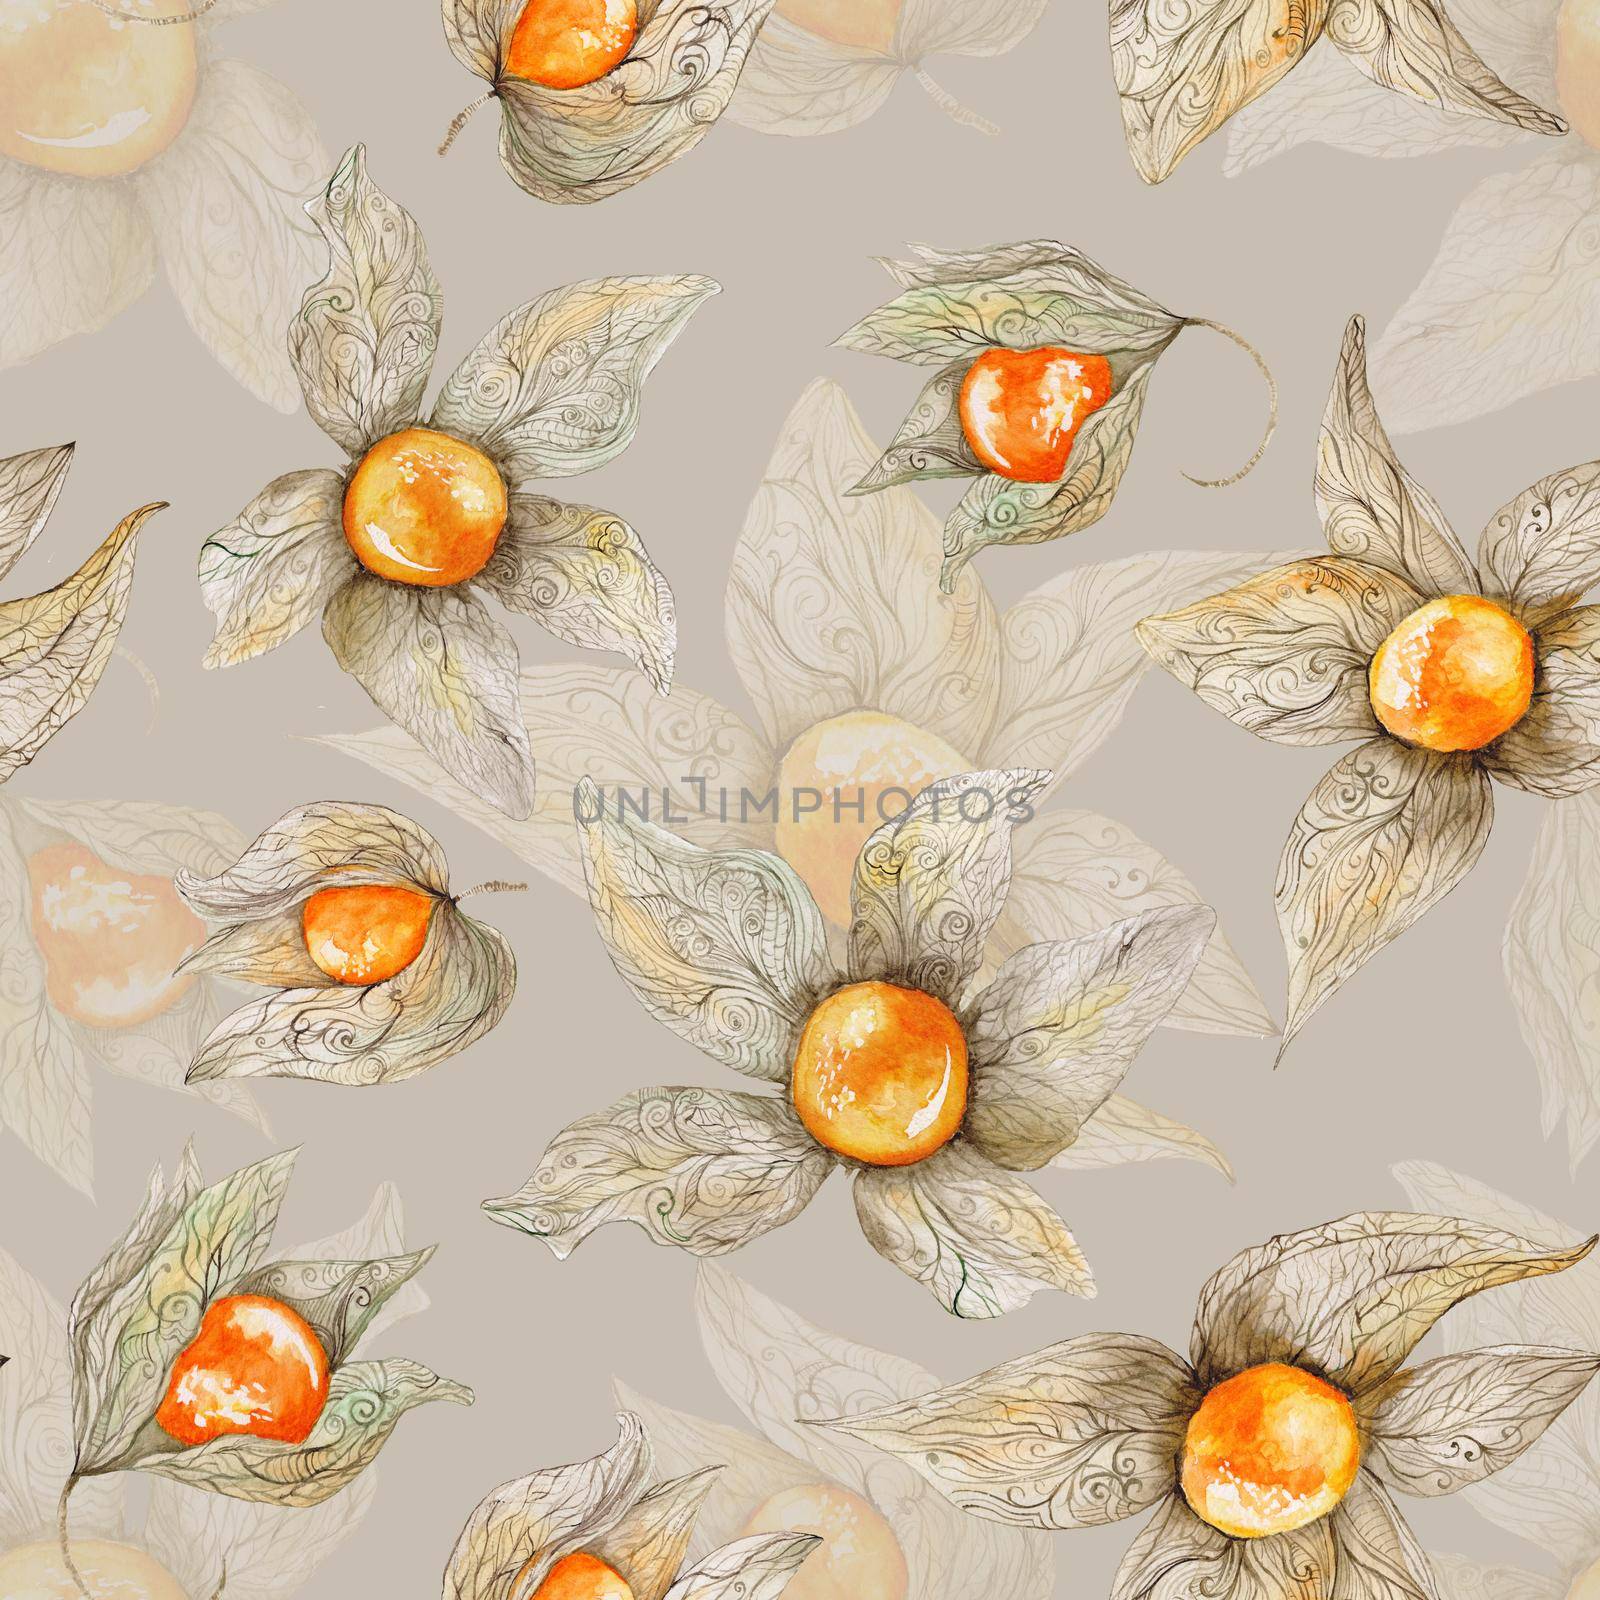 Colored aquarelle seamless texture with bright orange berries and pastel ornamental leafs